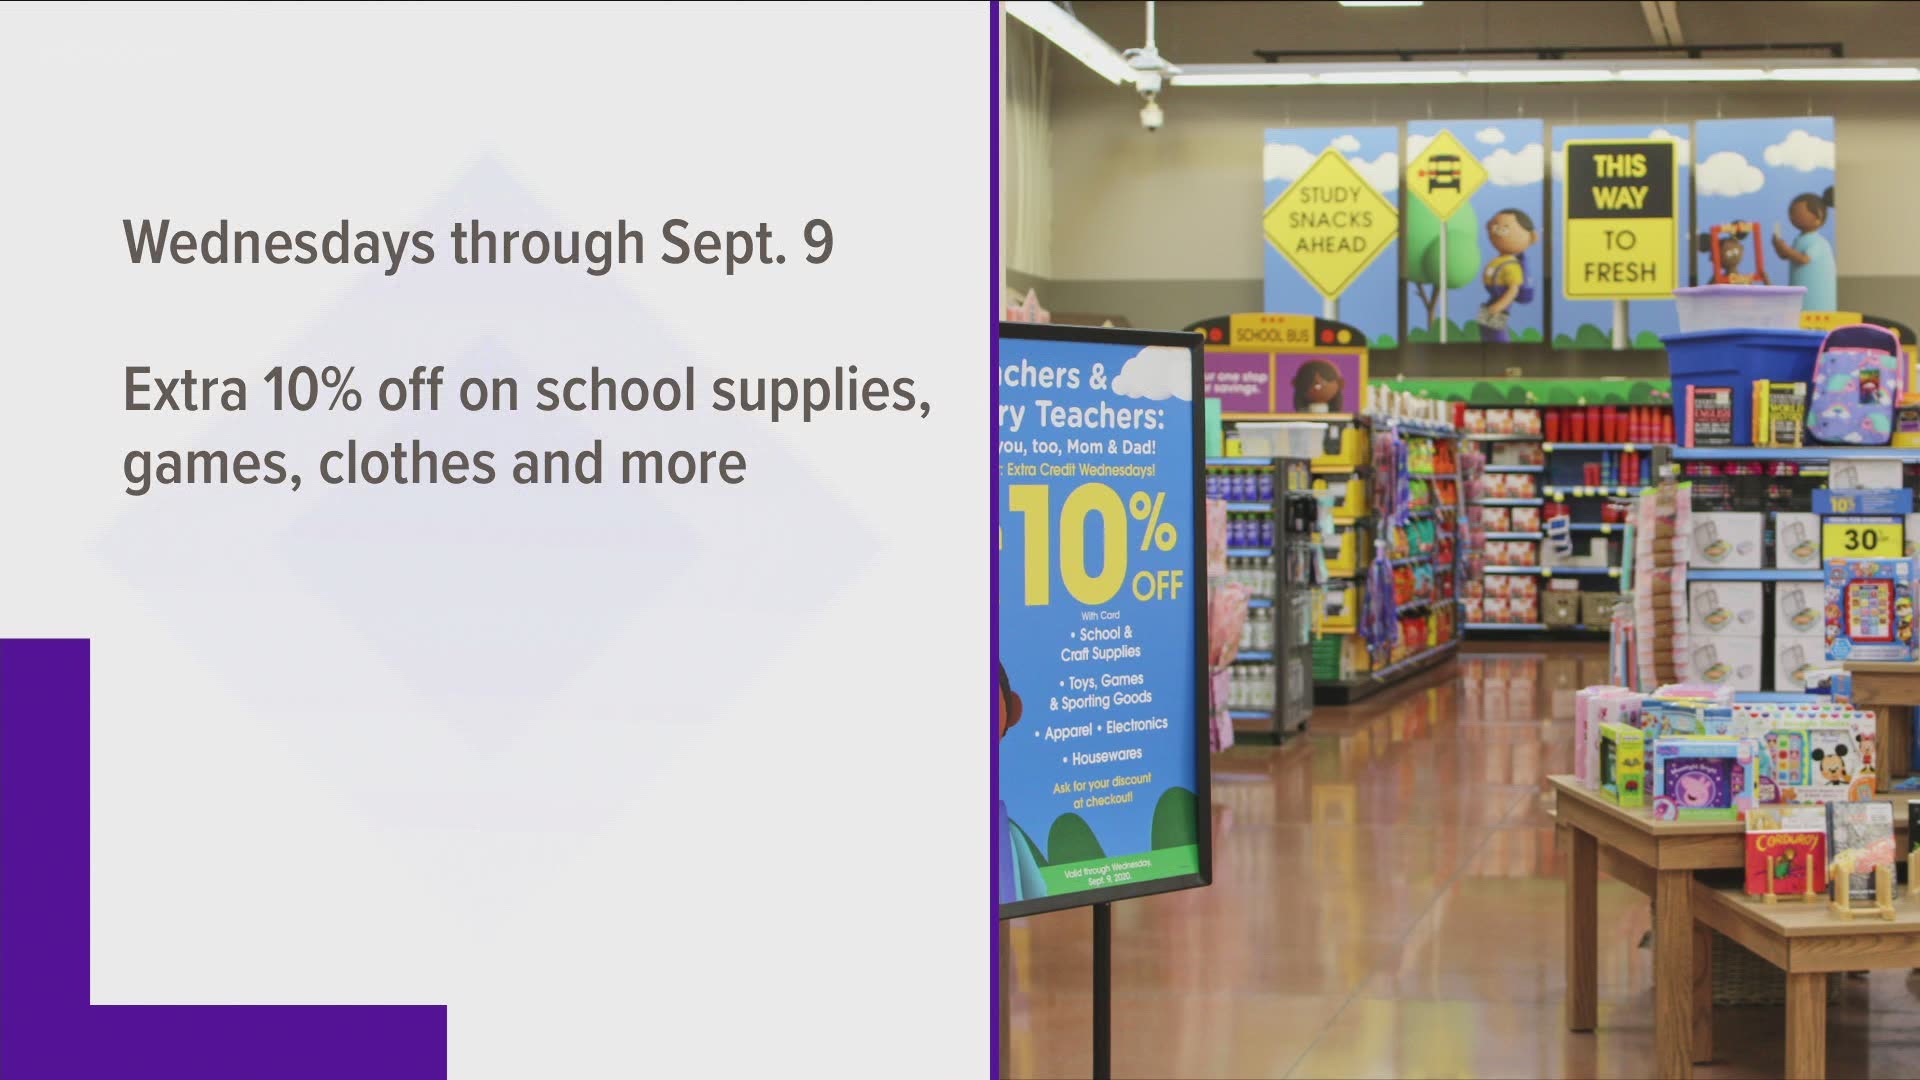 the discounts will be available on Wednesdays through Sept. 9. Shoppers will save an extra 10-percent on general merchandise, like school supplies and clothes.